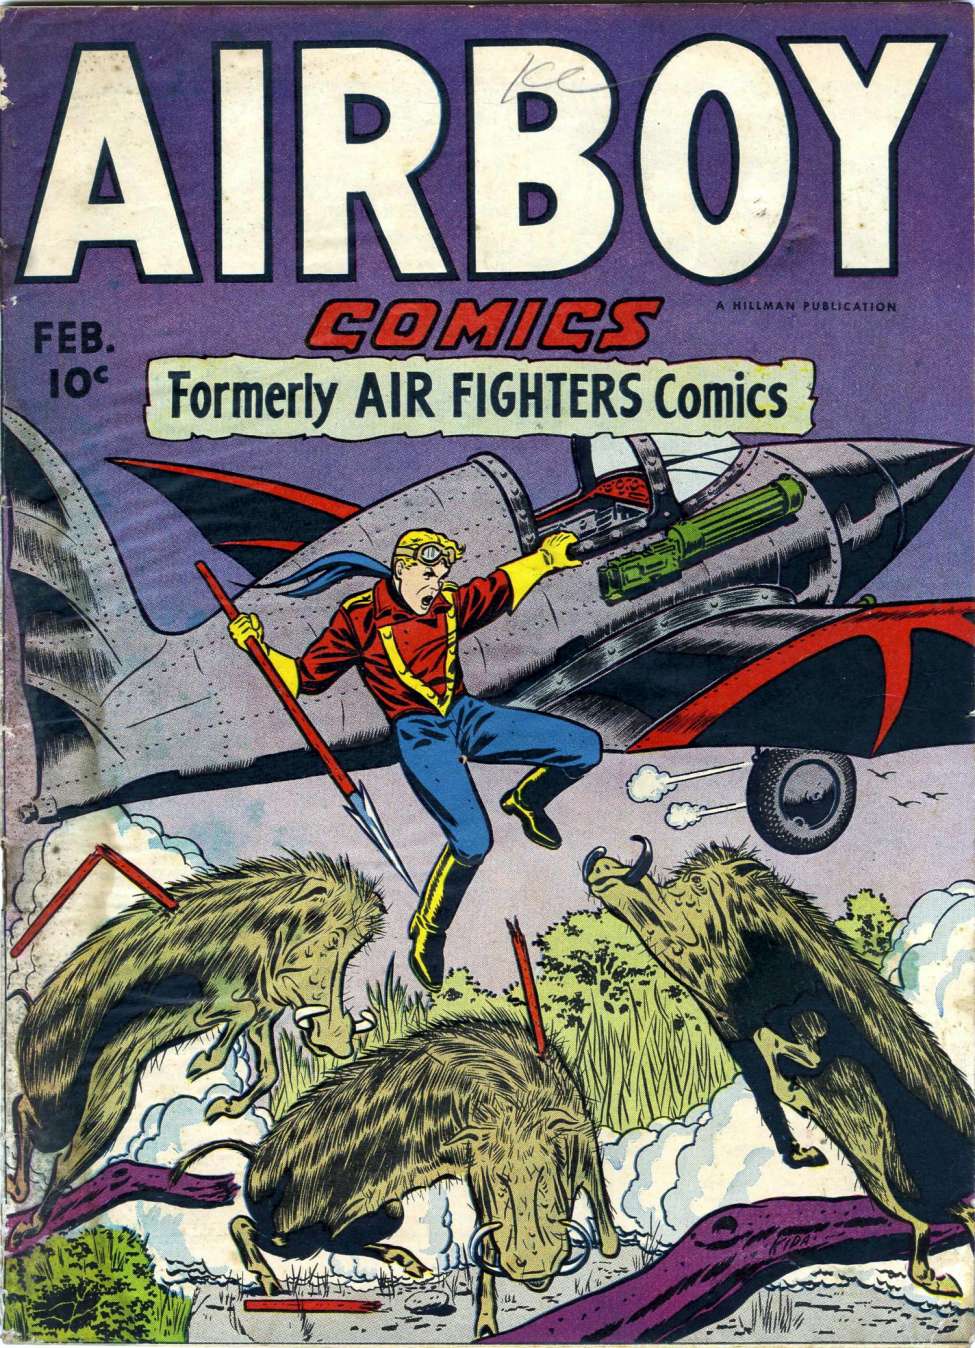 Book Cover For Airboy Comics v3 1